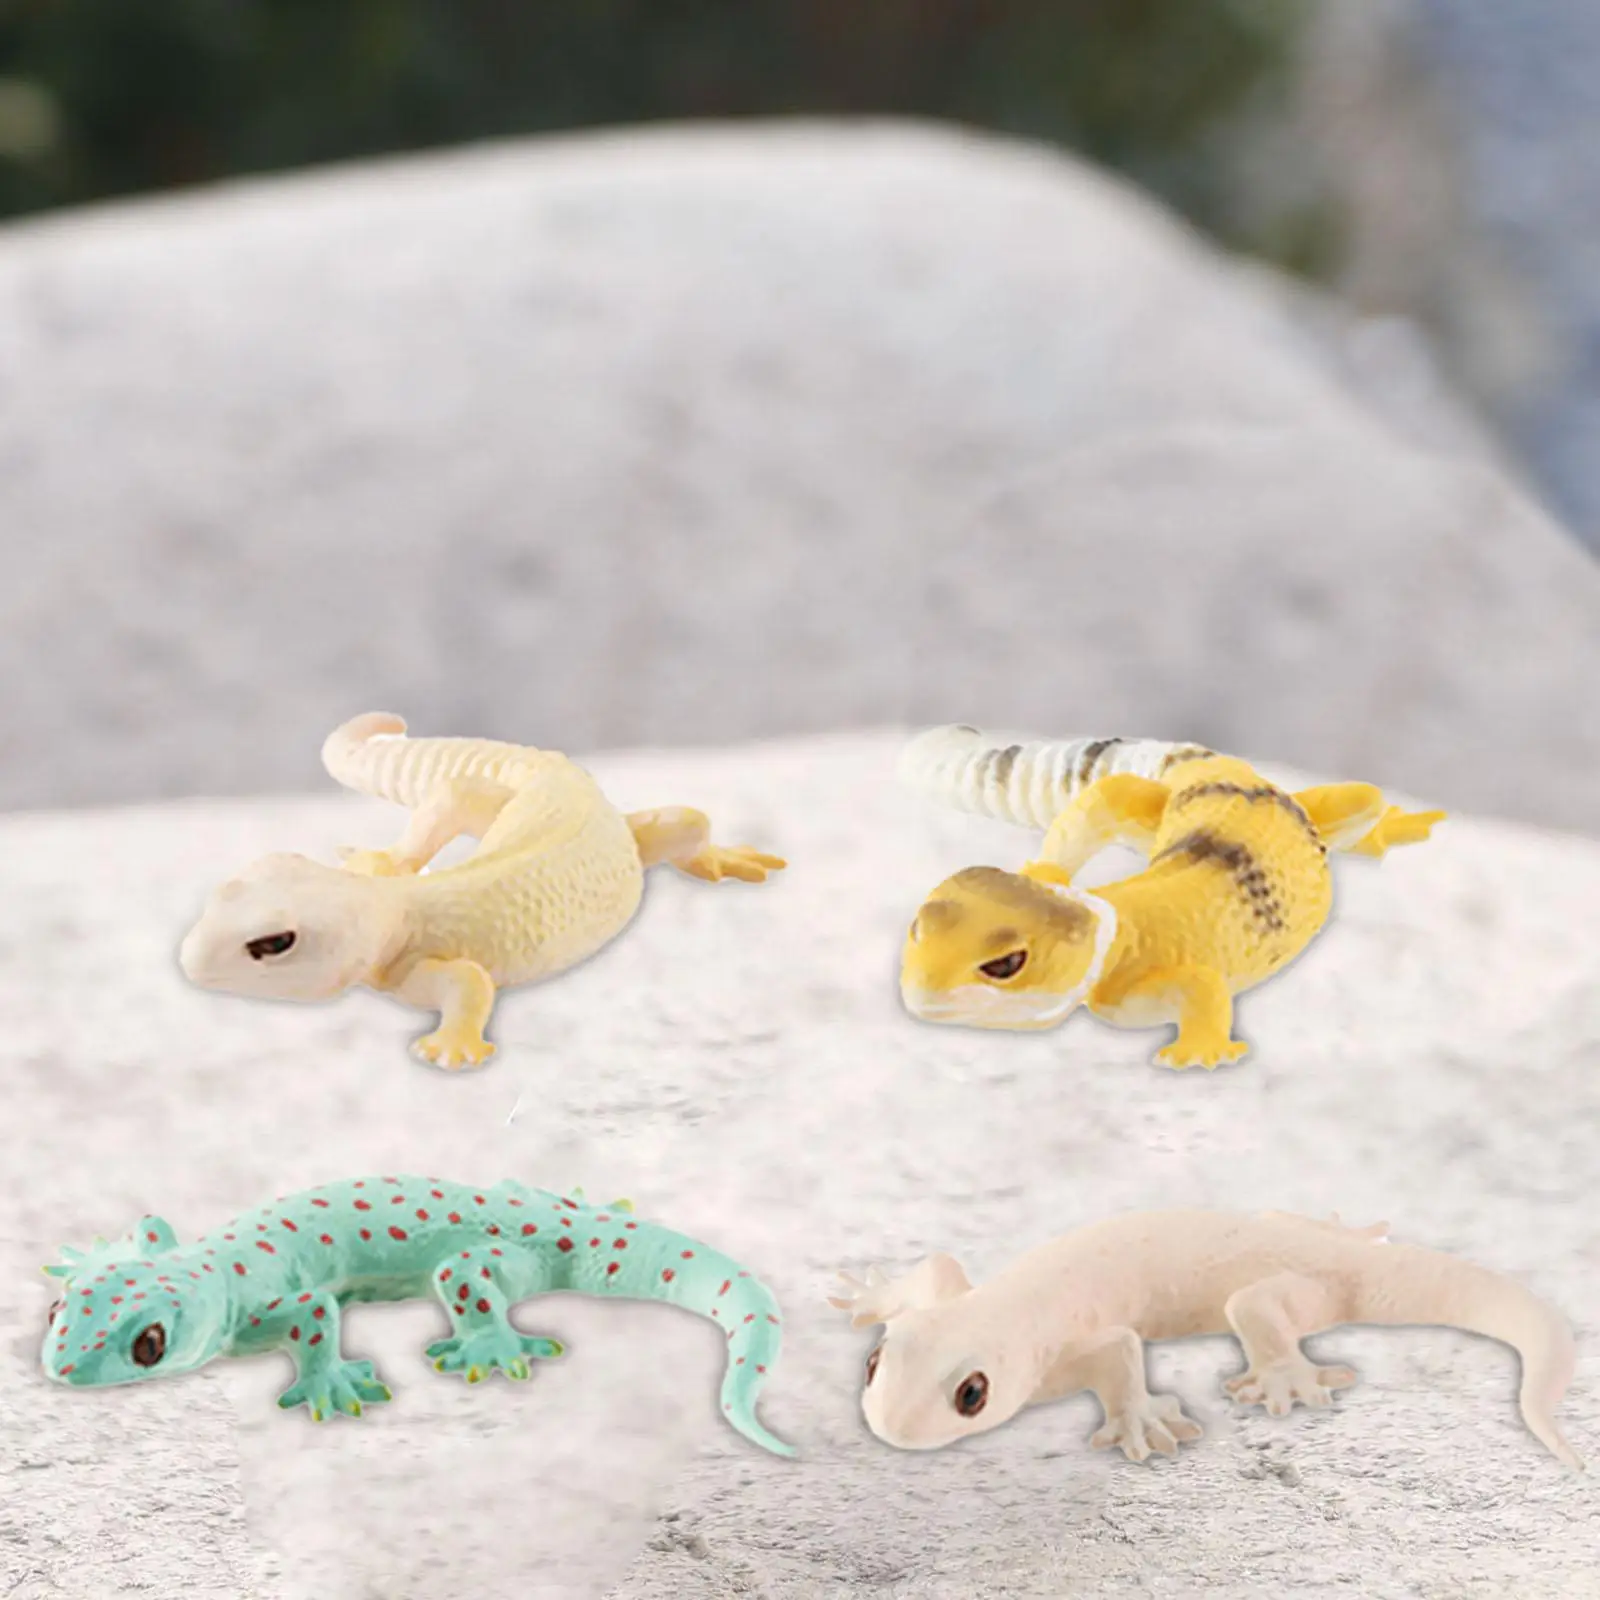 4x Simulation Animal Figures Collectible Decorations Gifts for Storytelling